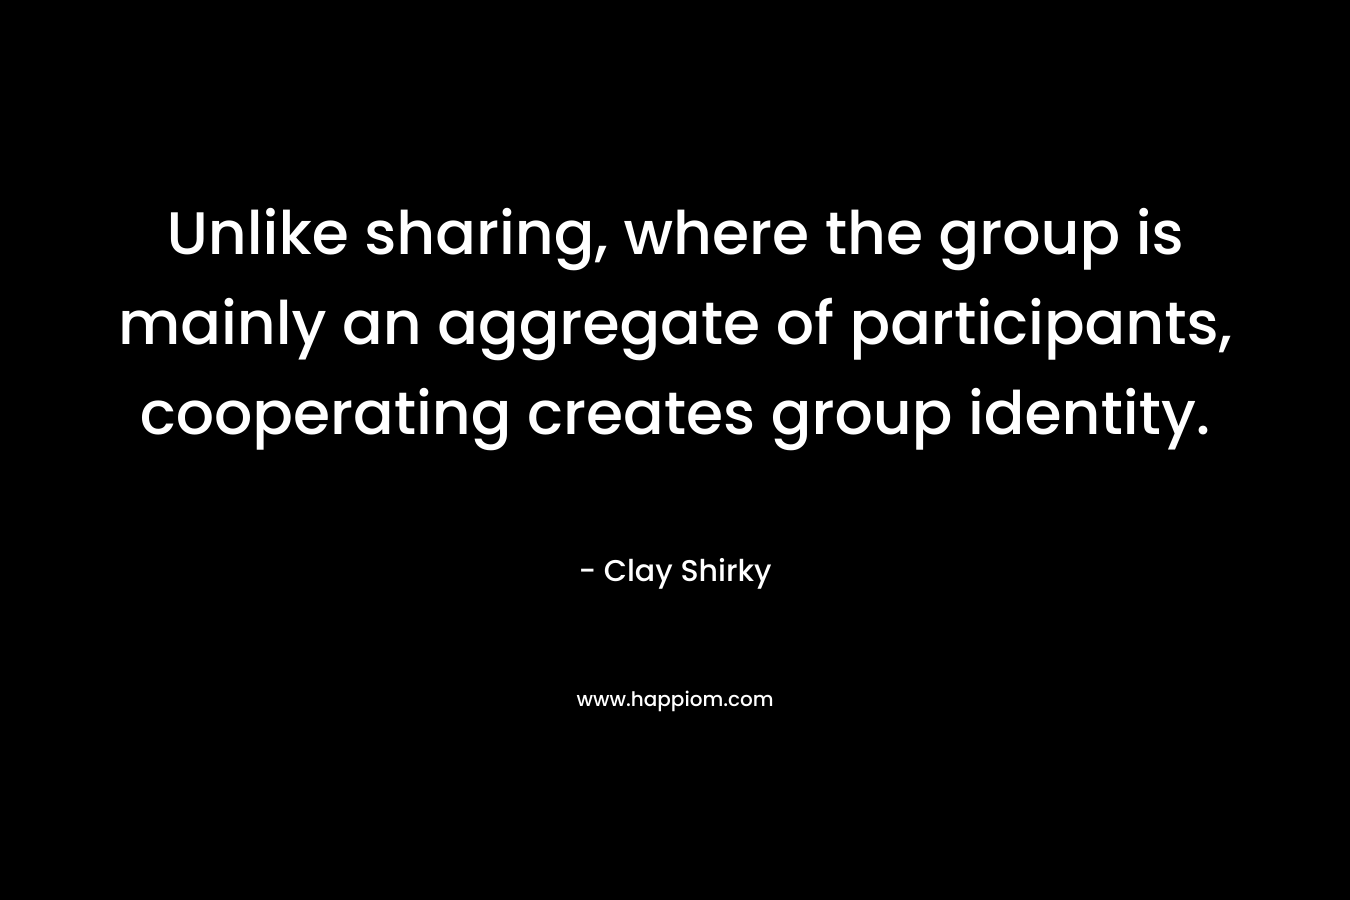 Unlike sharing, where the group is mainly an aggregate of participants, cooperating creates group identity. – Clay Shirky